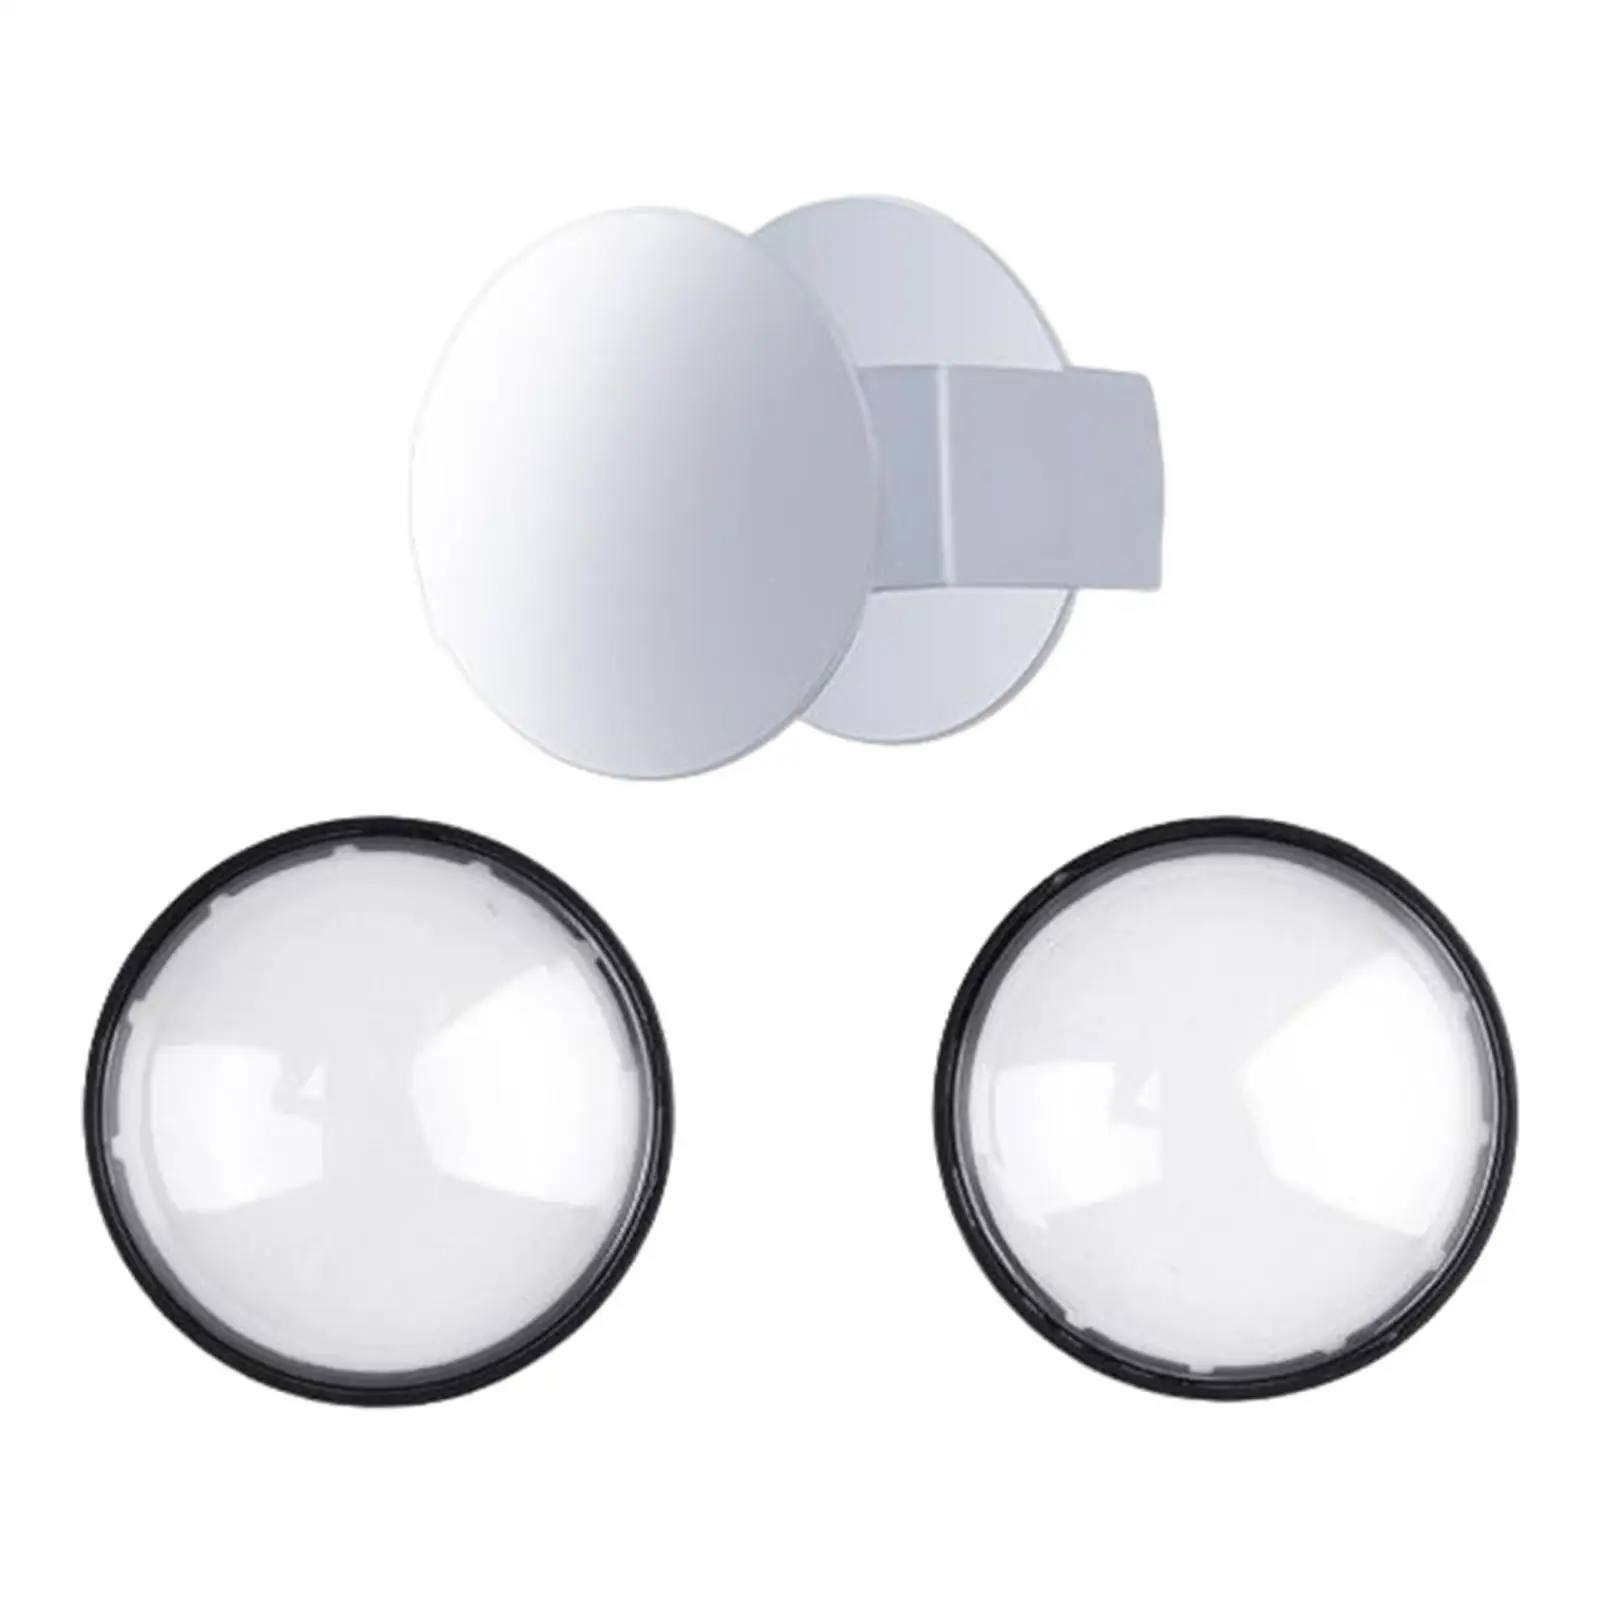 Lens Guards Replacement Protection Cover Lightweight Dustproof Screen Protector Kit Protective Lens Cover for Accessory